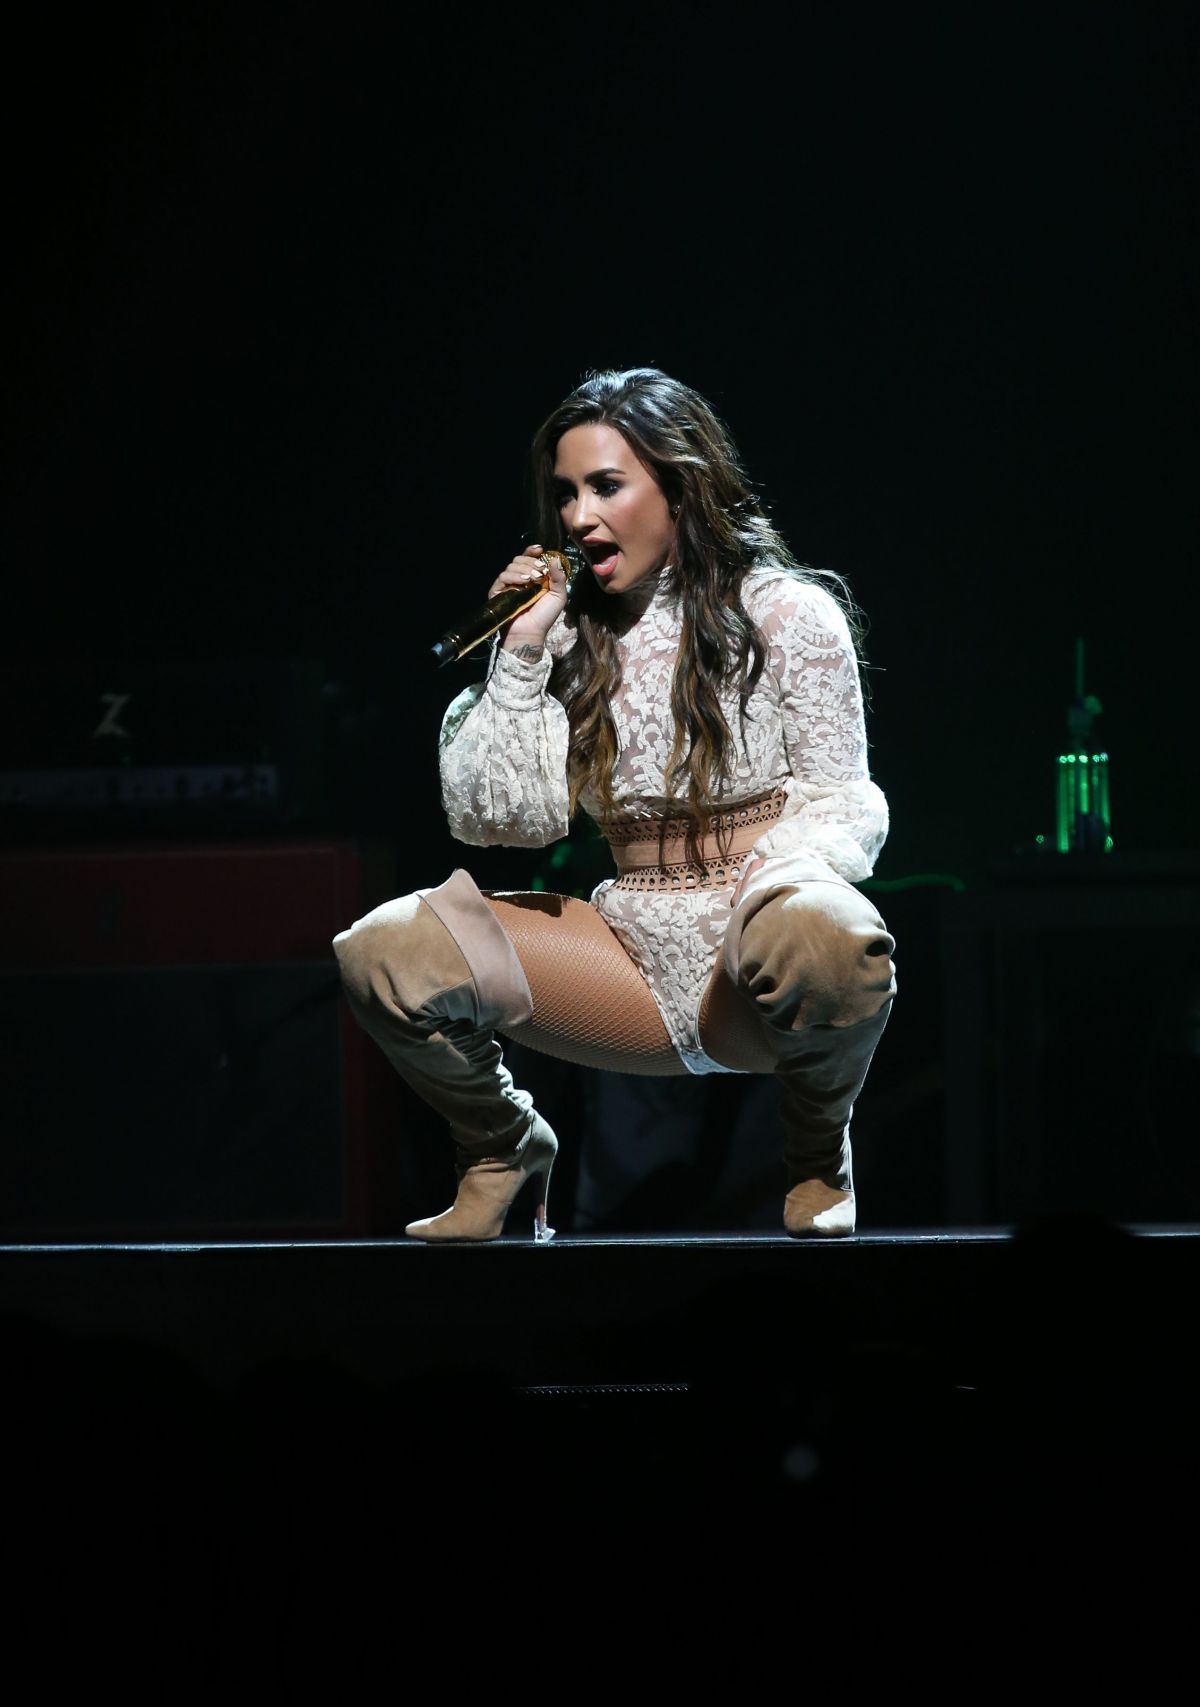 DEMI LOVATO Performs at a Concert in Nashville 09/07/2016 – HawtCelebs1200 x 1707